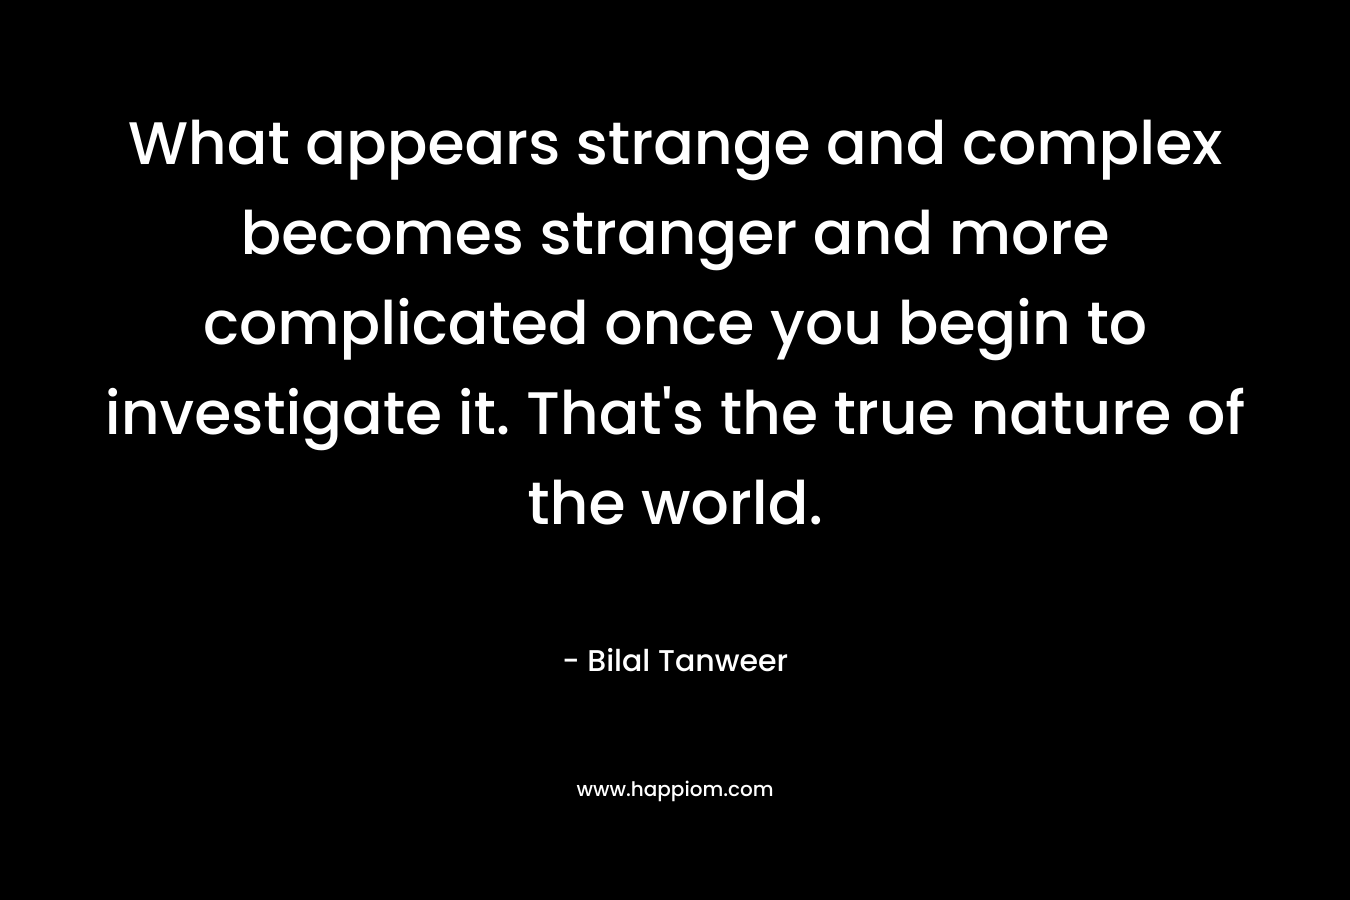 What appears strange and complex becomes stranger and more complicated once you begin to investigate it. That’s the true nature of the world. – Bilal Tanweer